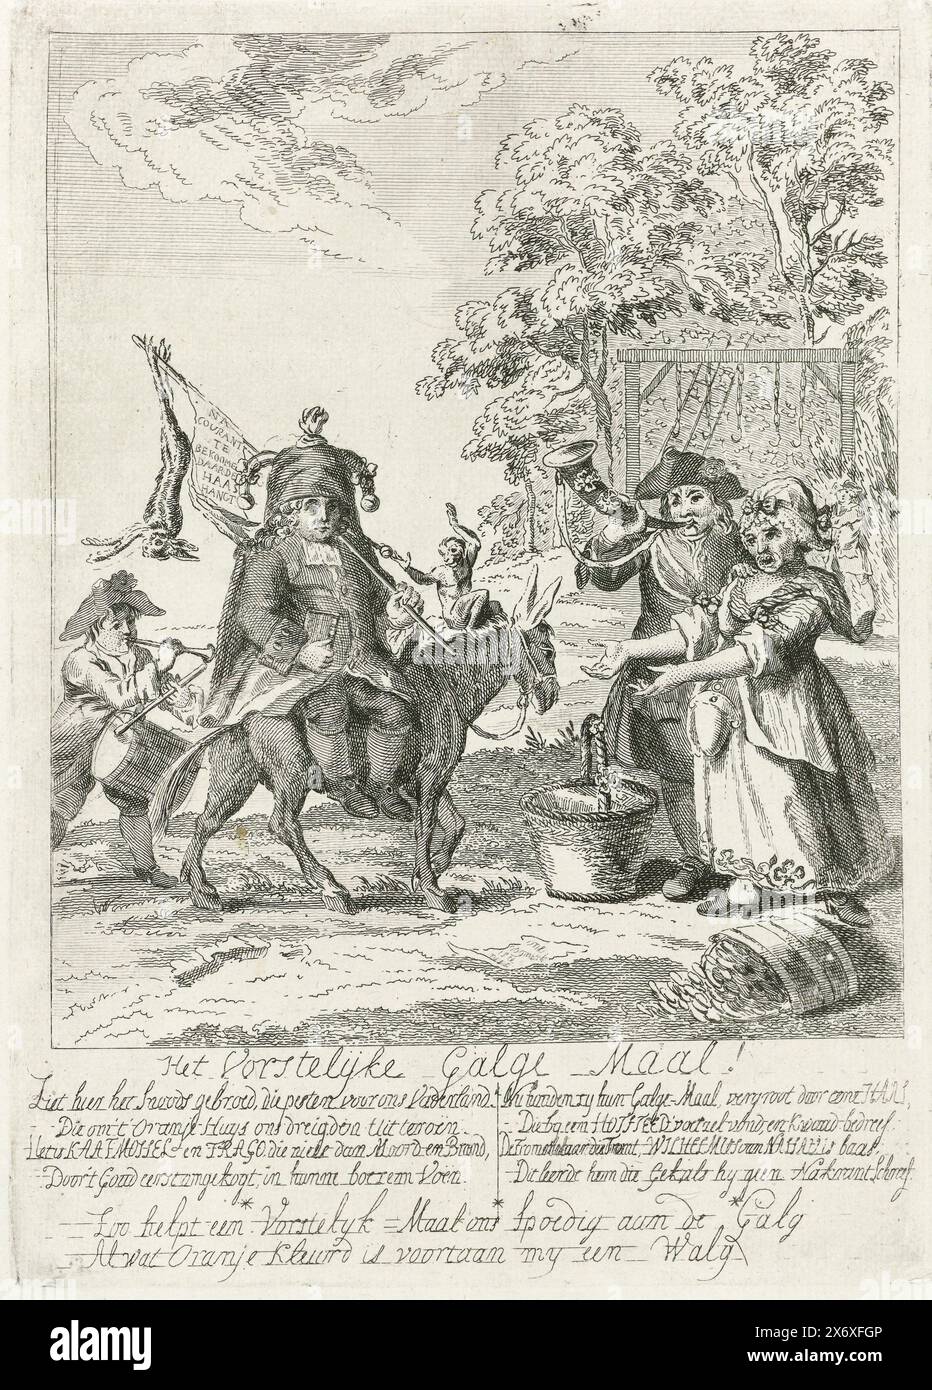 Cartoon on Kaat Mossel, Adriaan Trago and Petrus Hofstede, 1784, The Royal Galge Maal! (title on object), Cartoon on Kaat Mossel, the Leiden baker Adriaan Trago and preacher Petrus Hofstede following the publication of the Oranjegezinde Na-Courant in Rotterdam, 1784. On the left Hofstede with a fool's hood and a monkey riding on a donkey with a banner carrying a hare hangs. On the right Kaat Mossel next to an overturned bucket of mussels, Trago blowing his baker's horn. In the background a gallows with five ropes. In the caption a verse of ten lines., print, print maker: anonymous, Northern Stock Photo